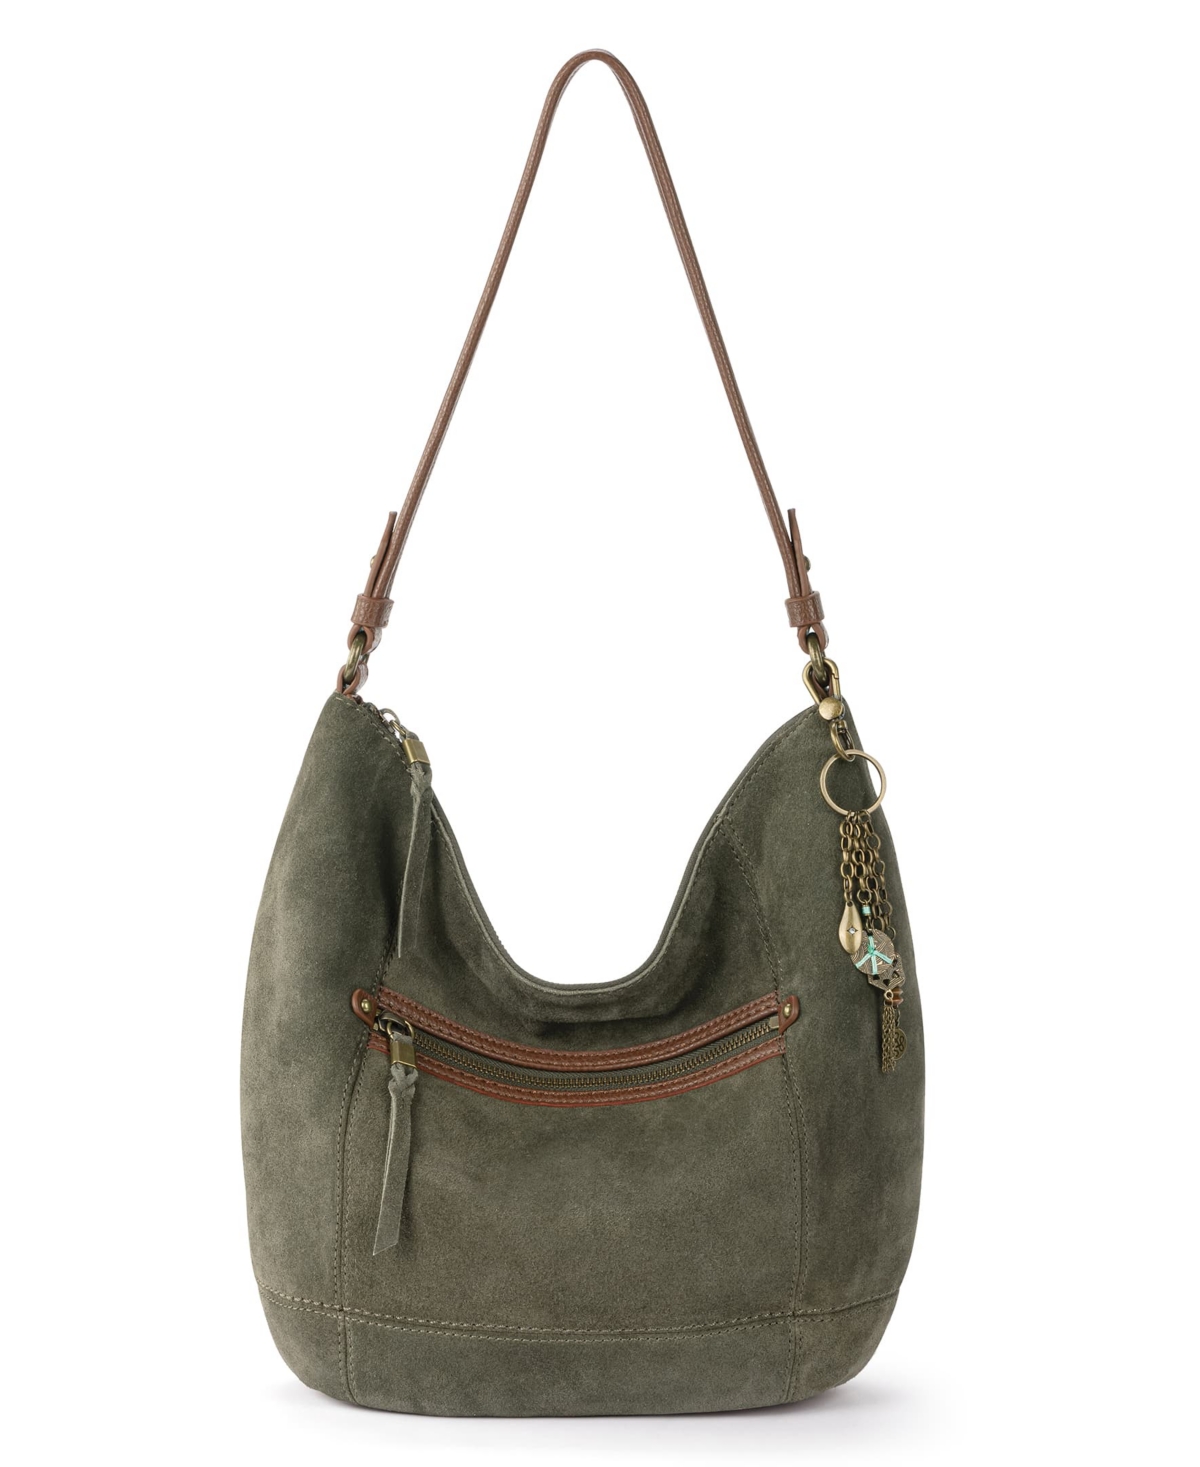 The Sak Women's Sequoia Leather Hobo In Moss Suede